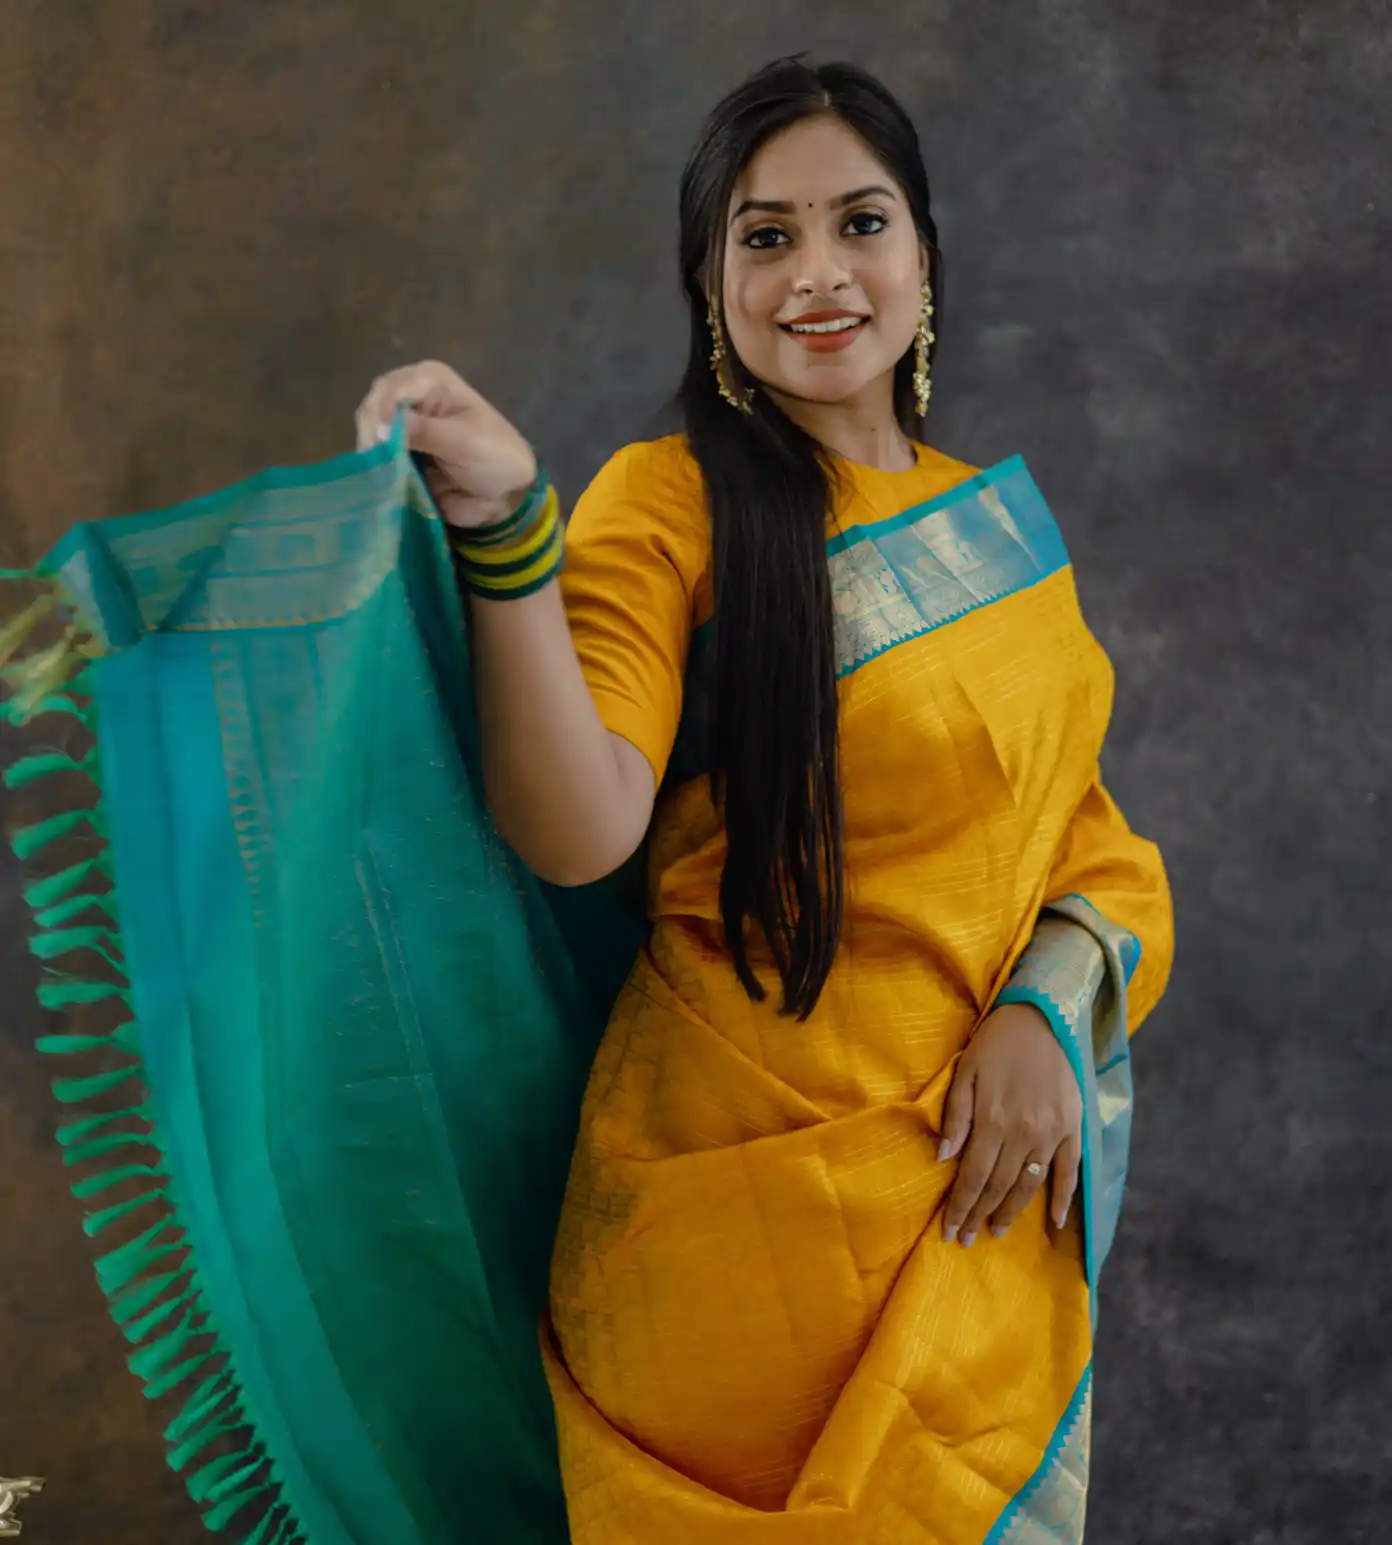 Buy Teal blue Sarees for Women by Saree mall Online | Ajio.com